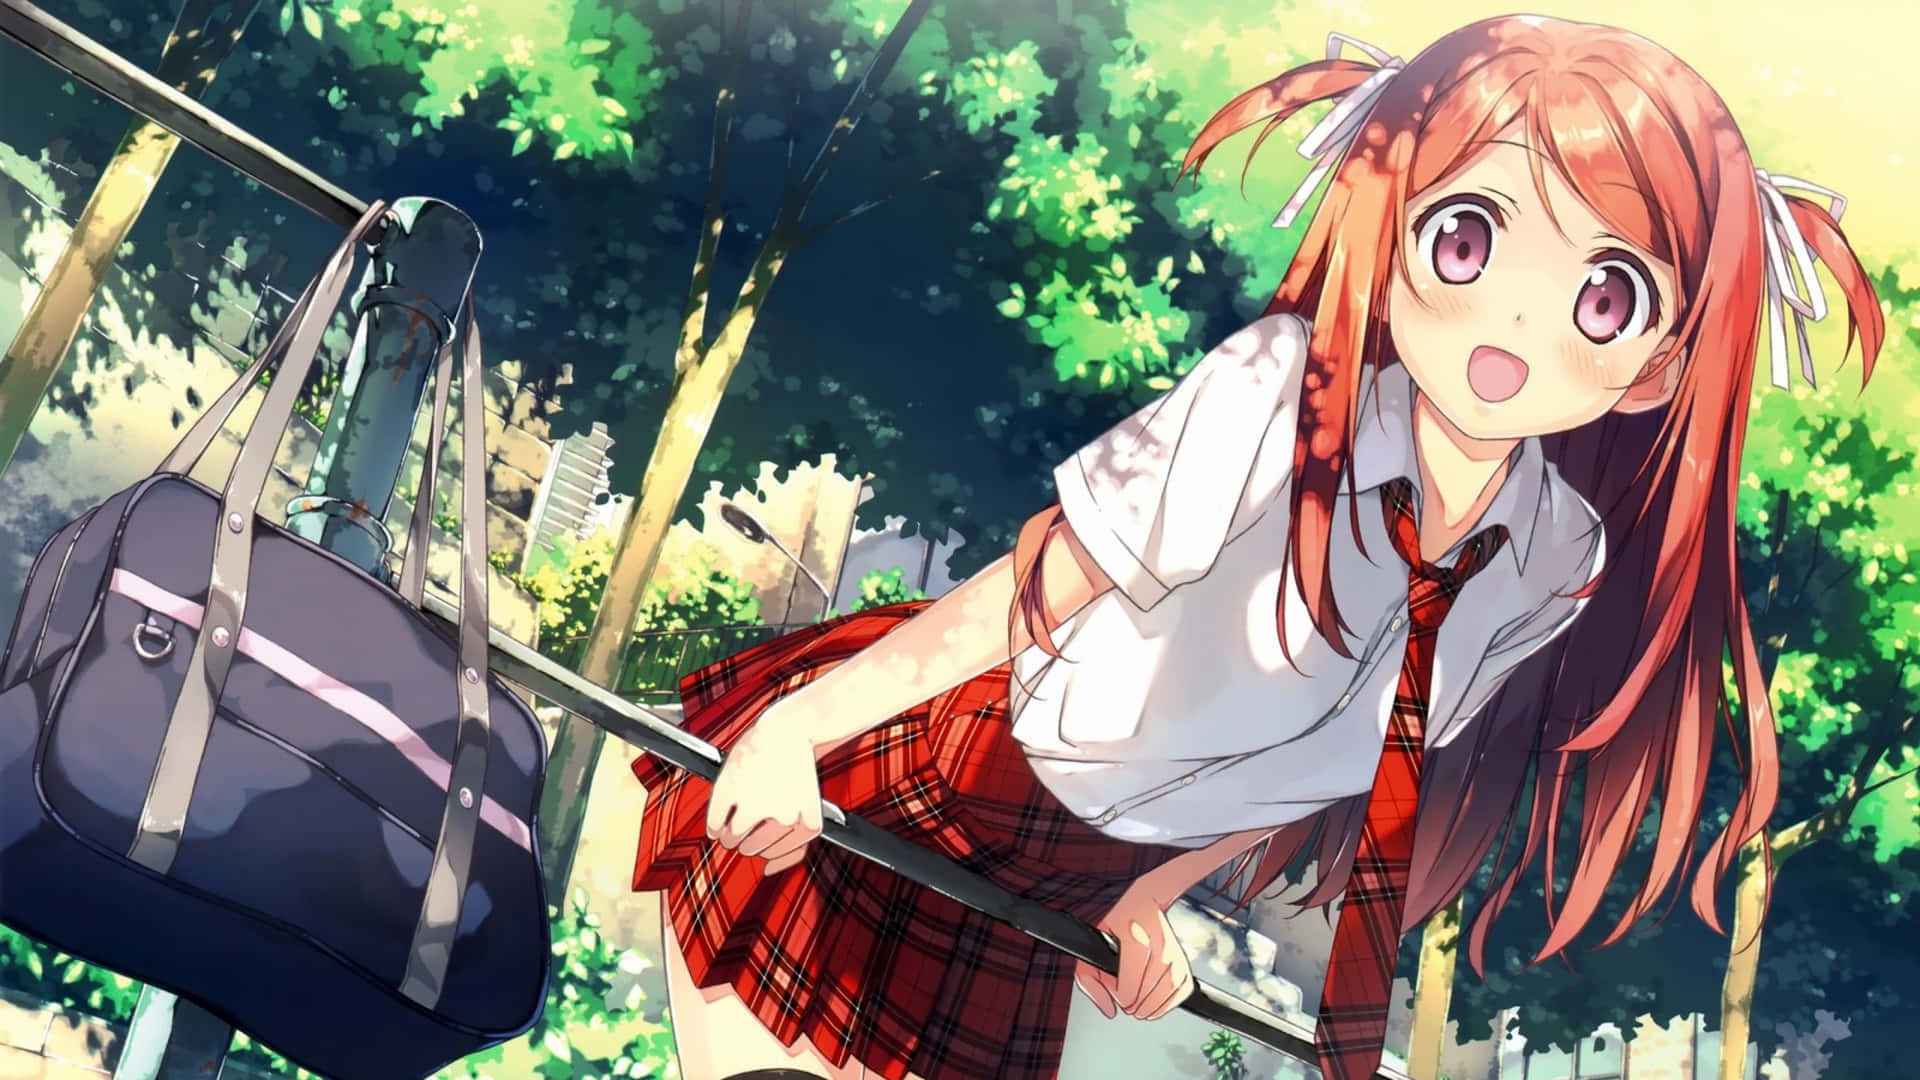 Anime Girl With Bag At School Gate Wallpaper